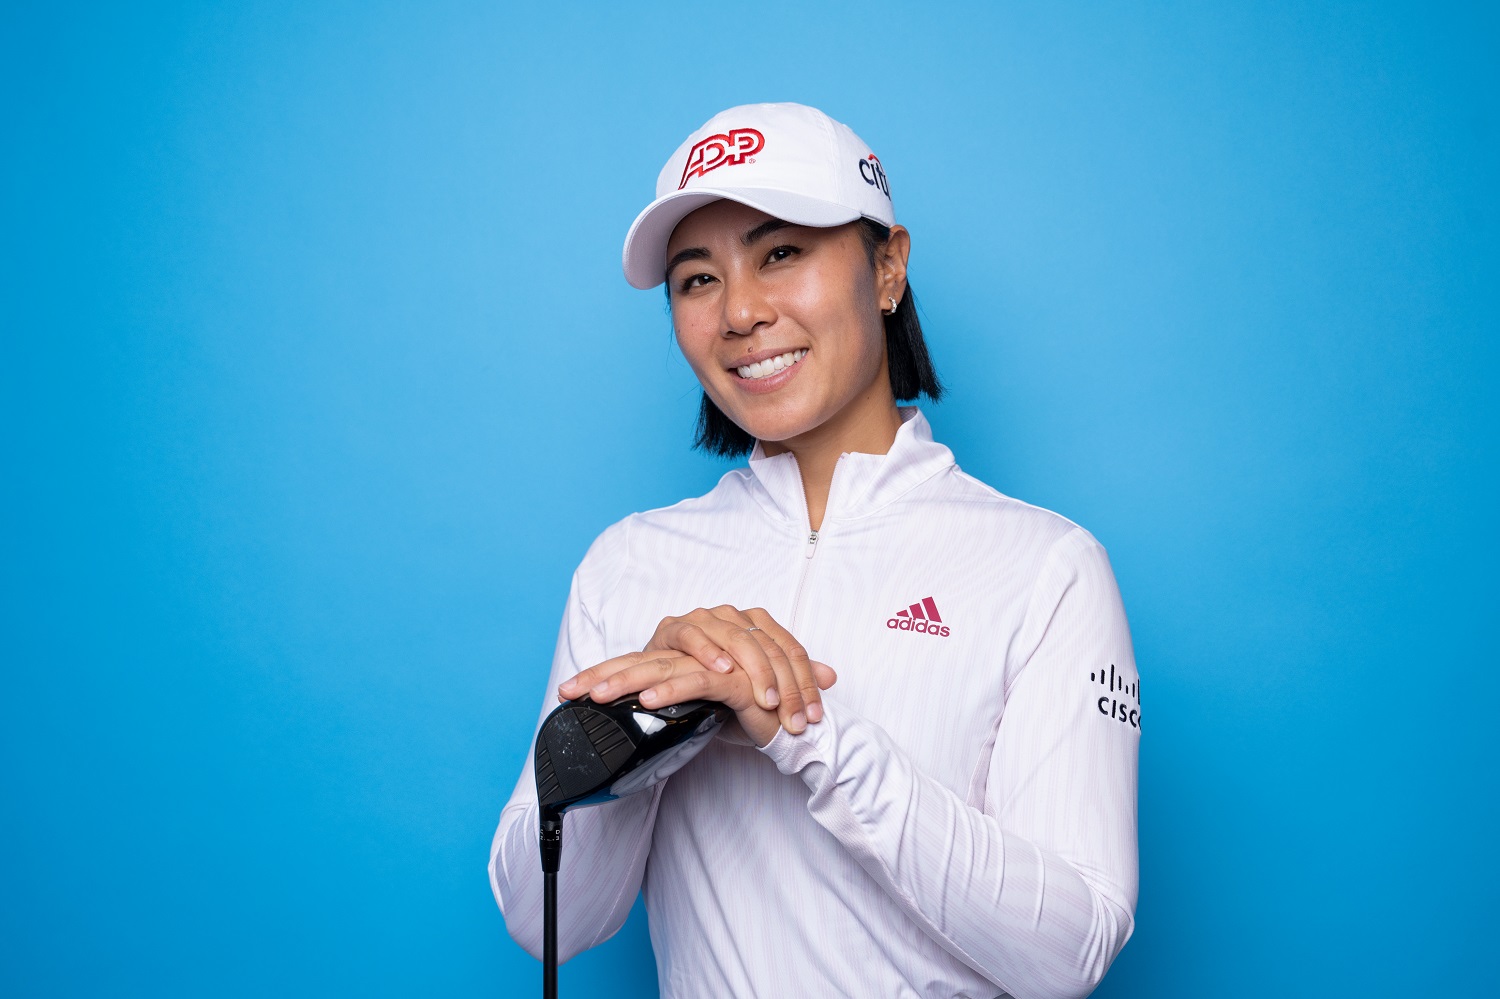 Danielle Kang poses for a portrait during the LPGA Photo Shoot leading up to the JTBC Classic at Aviara Golf Club on March 22, 2022, in Carlsbad, California. | Donald Miralle/Getty Images